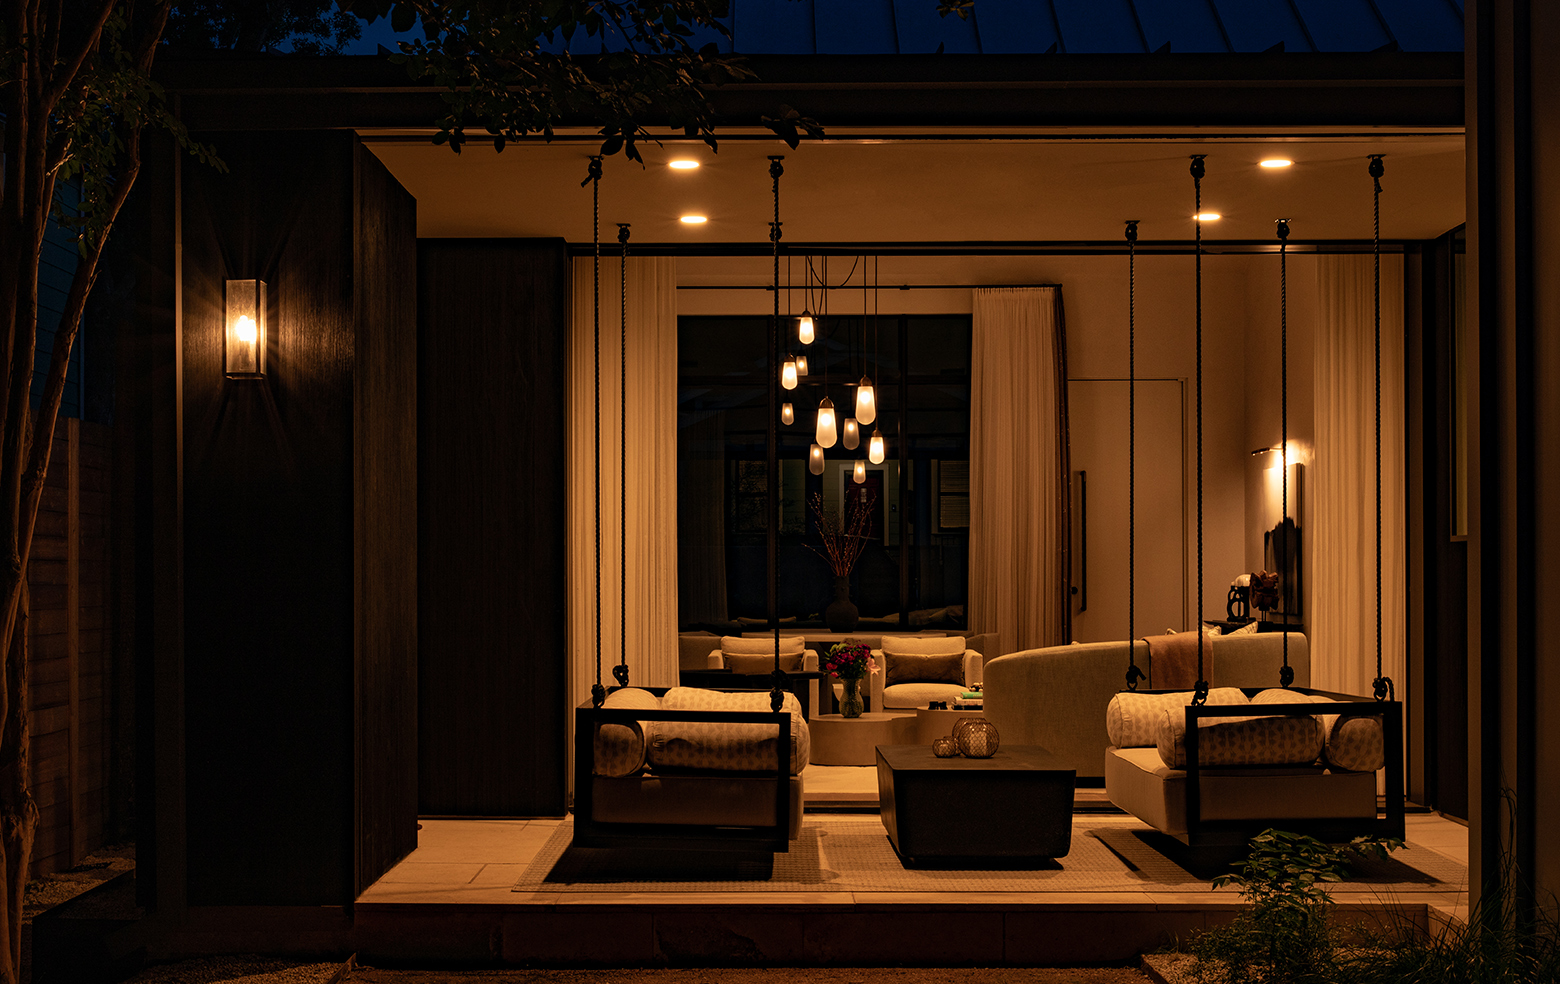 Outdoor decorative lighting over a seating area at night